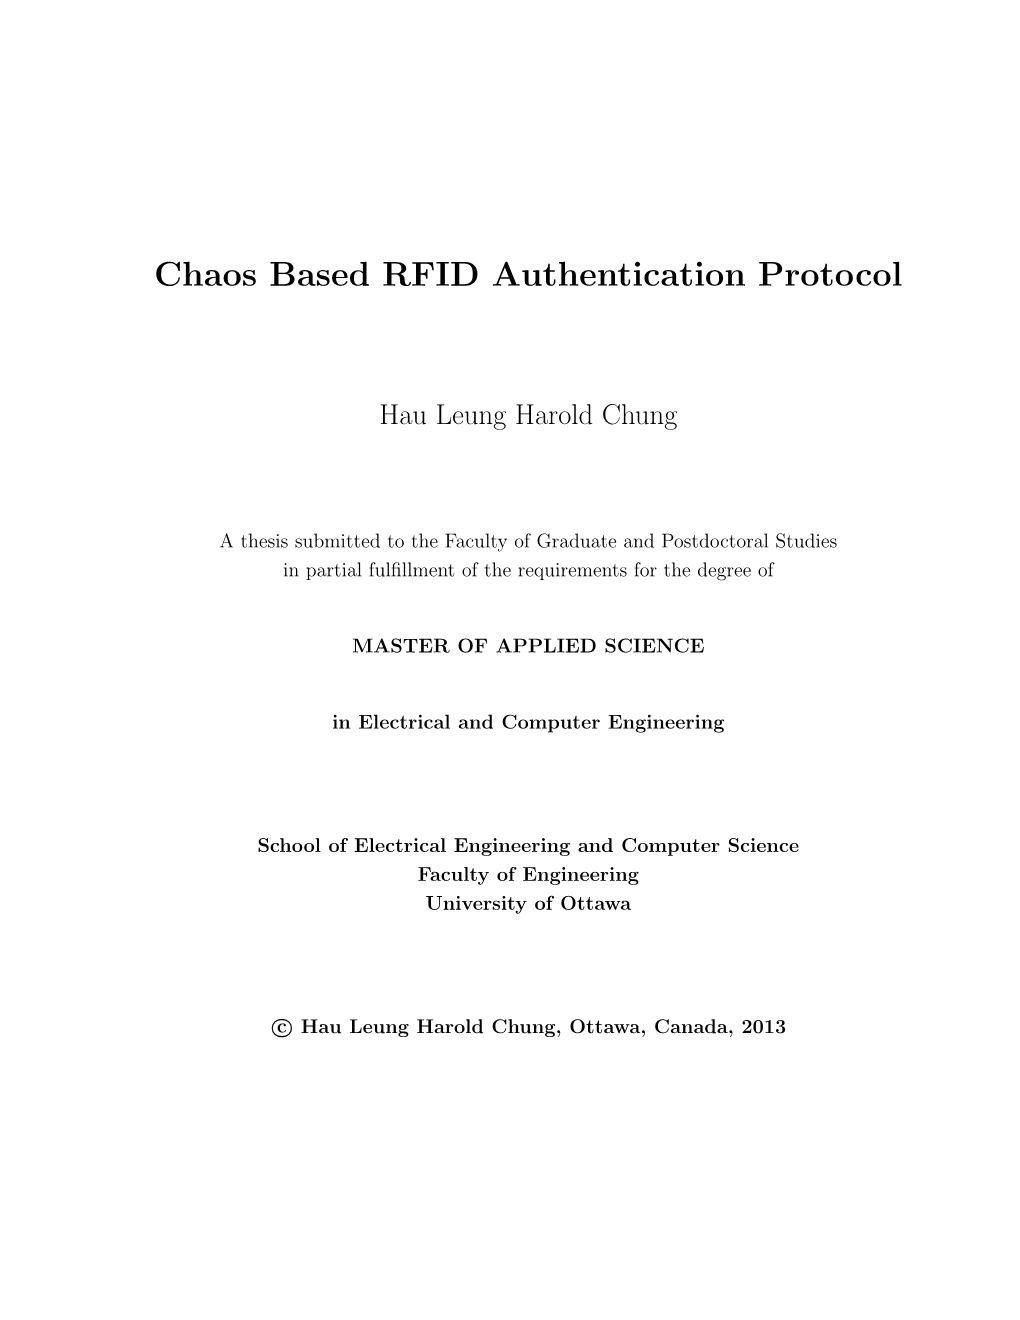 Chaos Based RFID Authentication Protocol